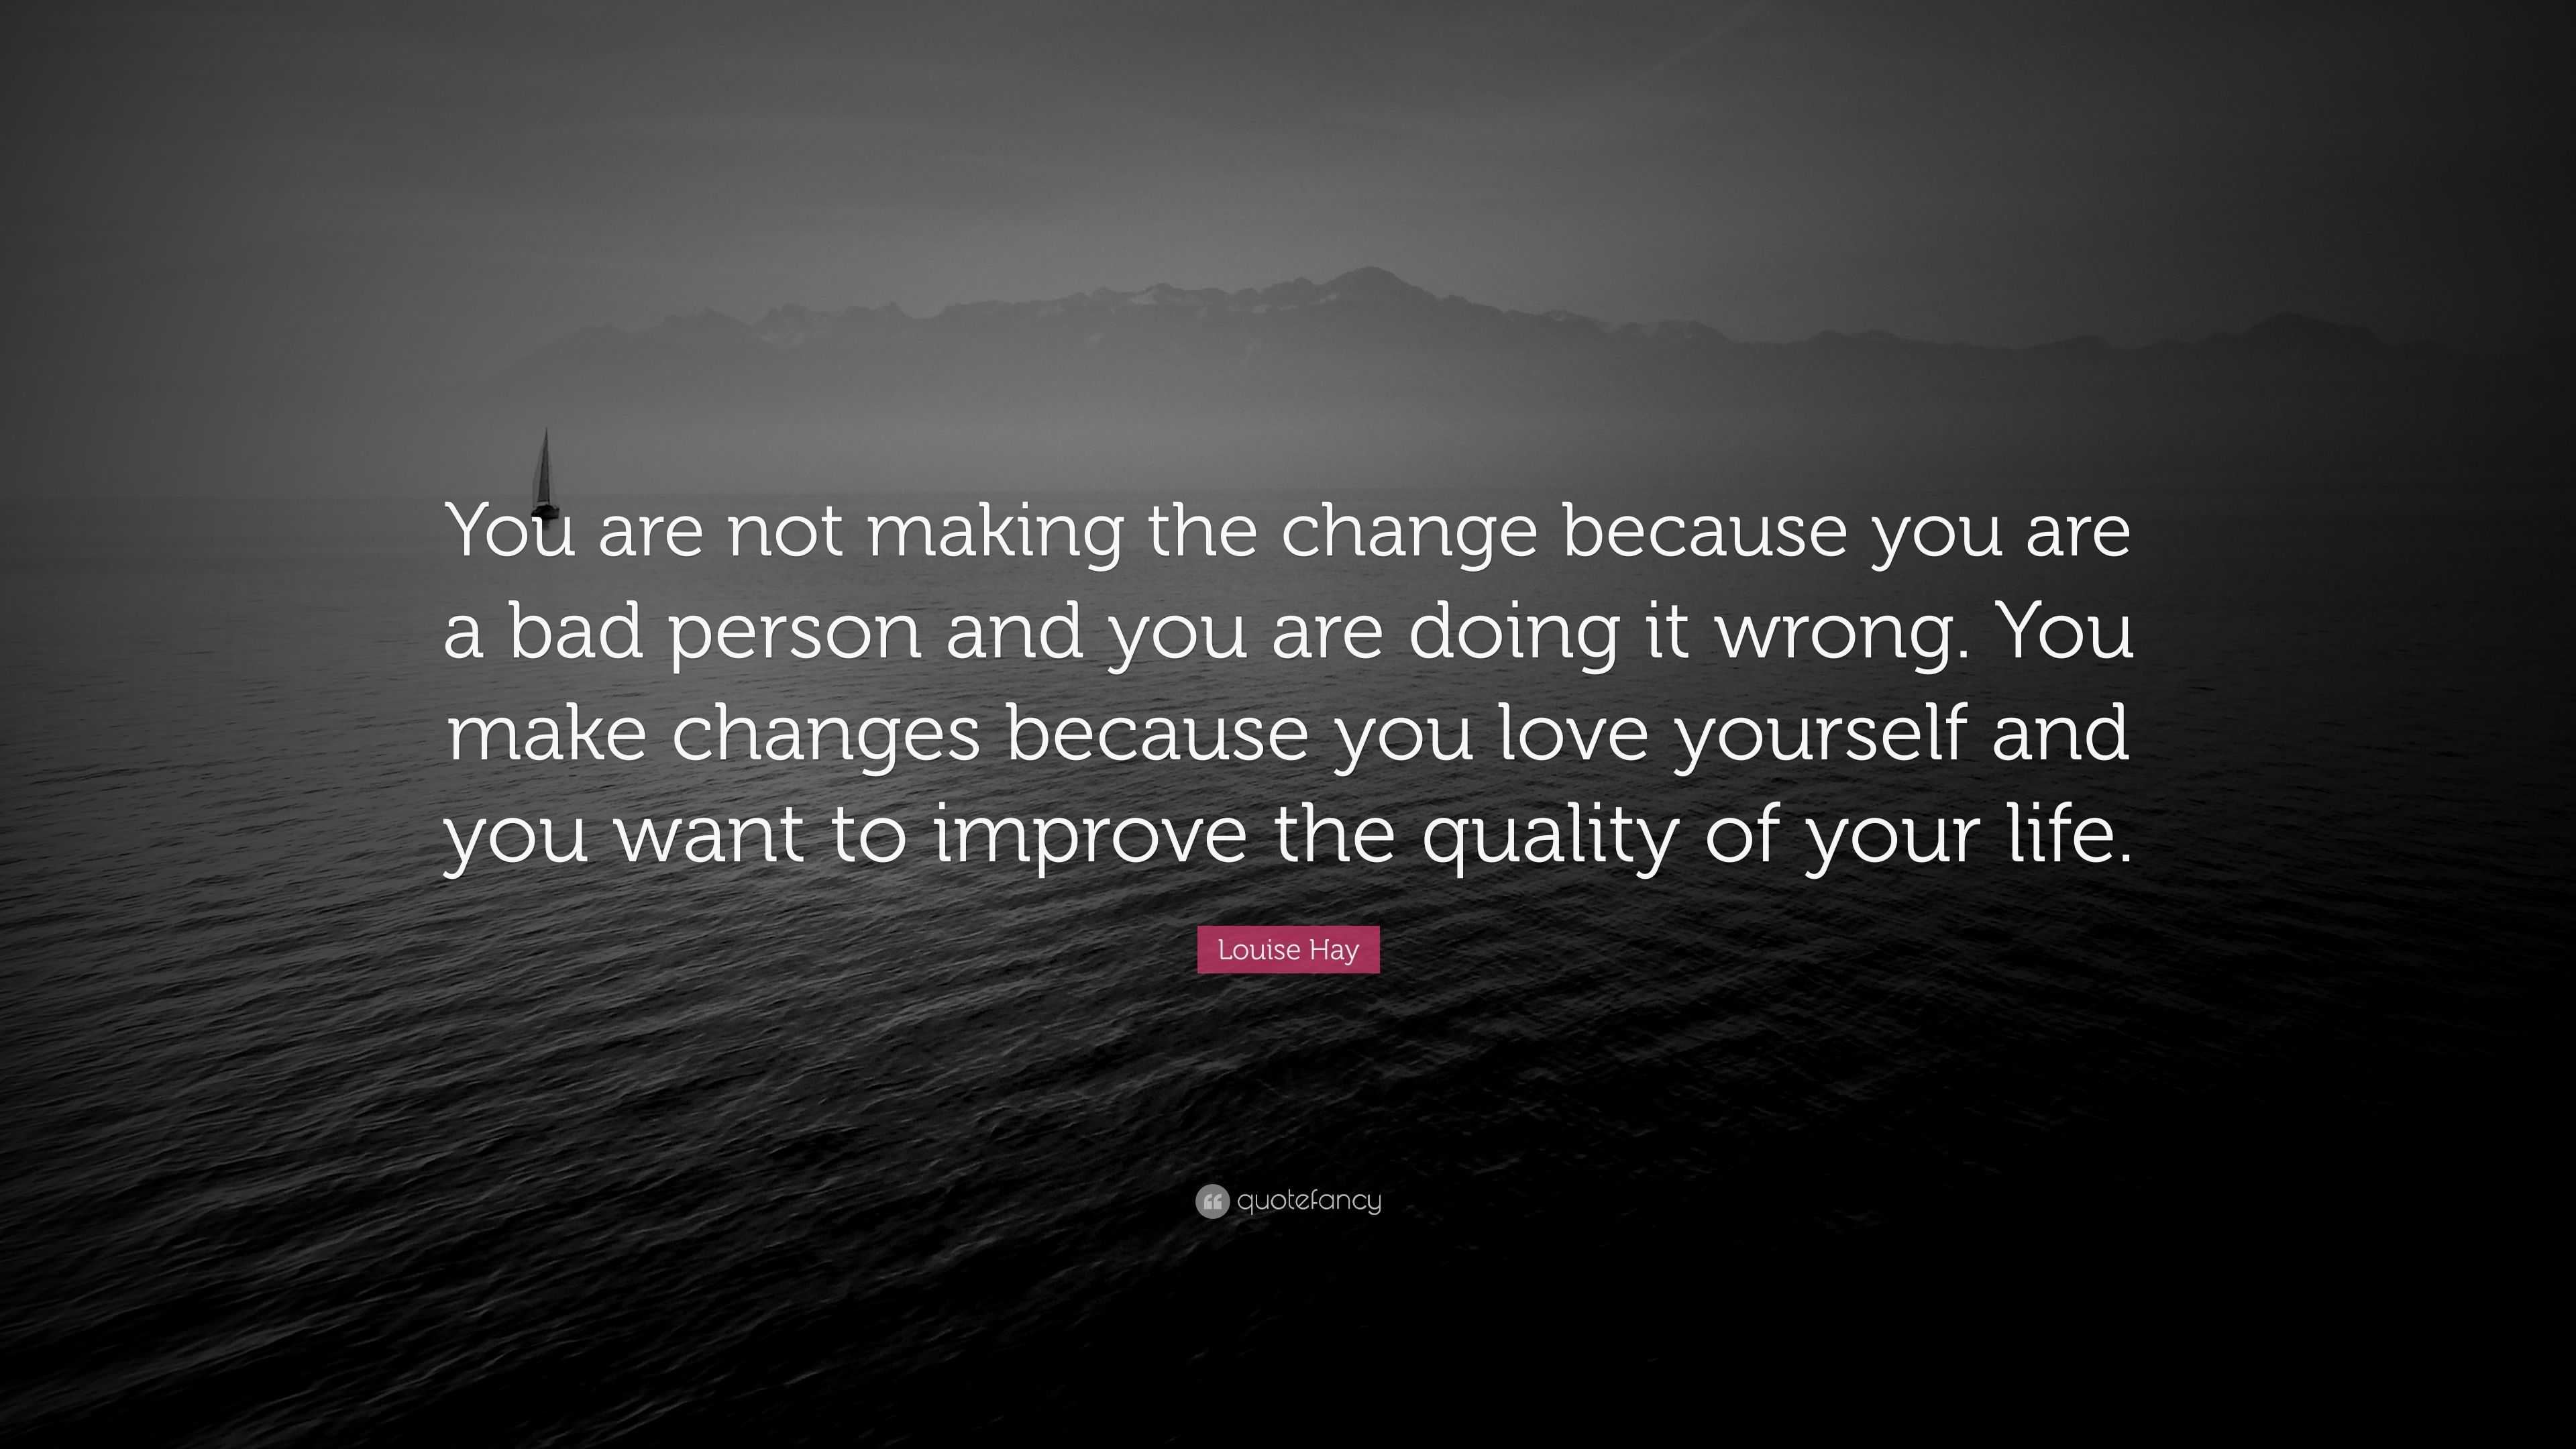 Louise Hay Quote “You are not making the change because you are a bad